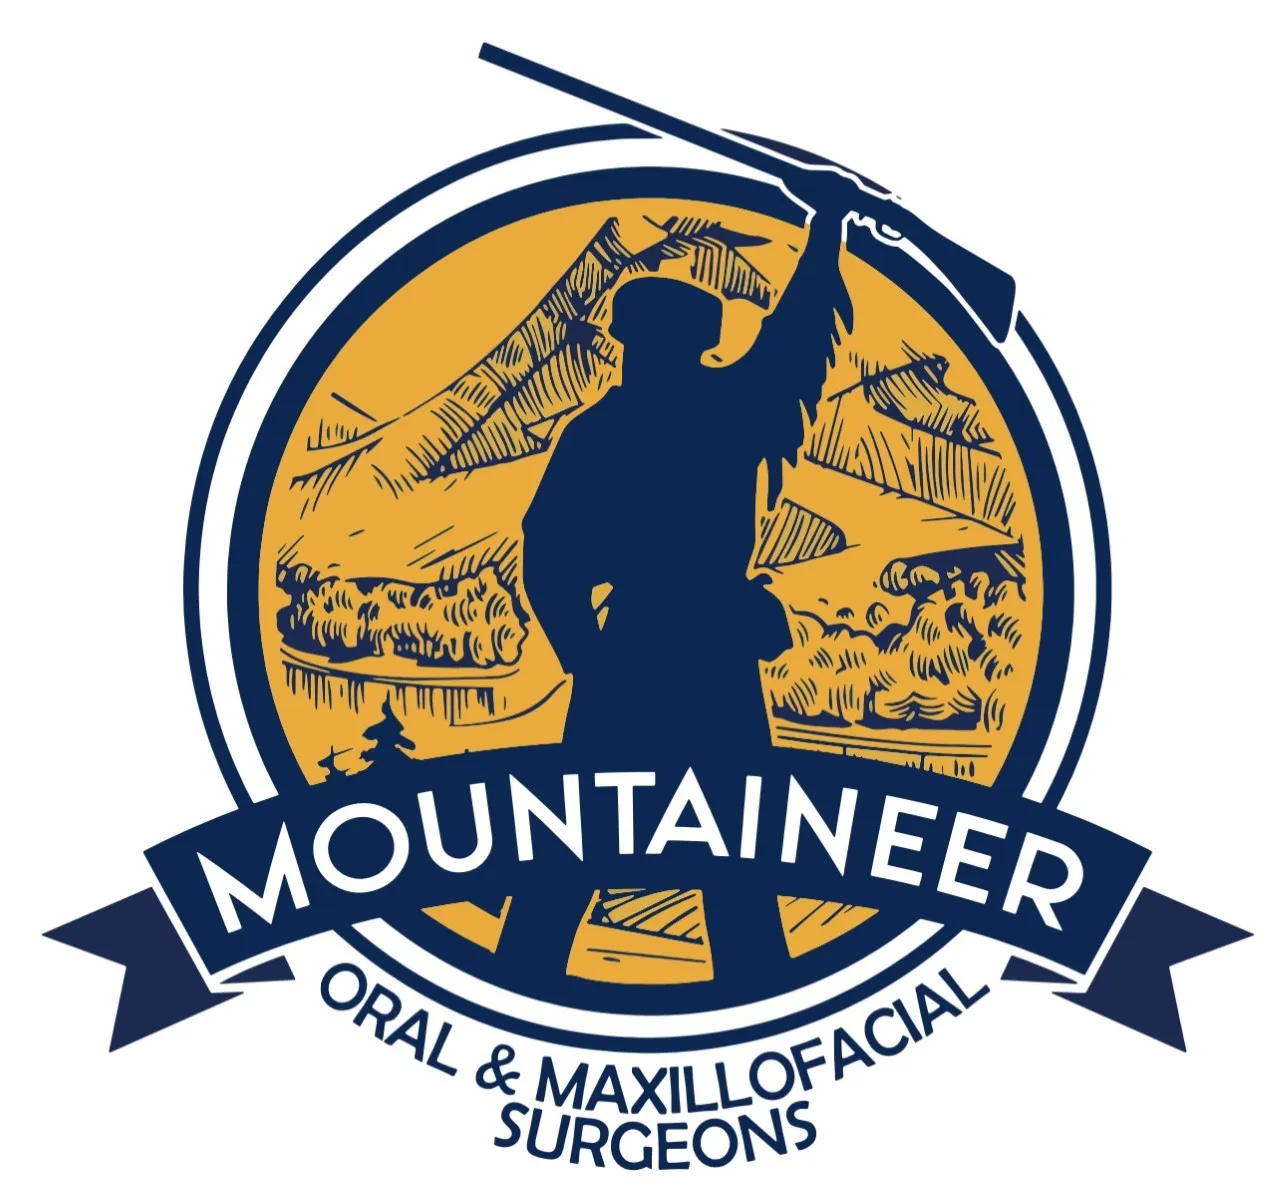 Link to Mountaineer Oral & Maxillofacial Surgeons home page